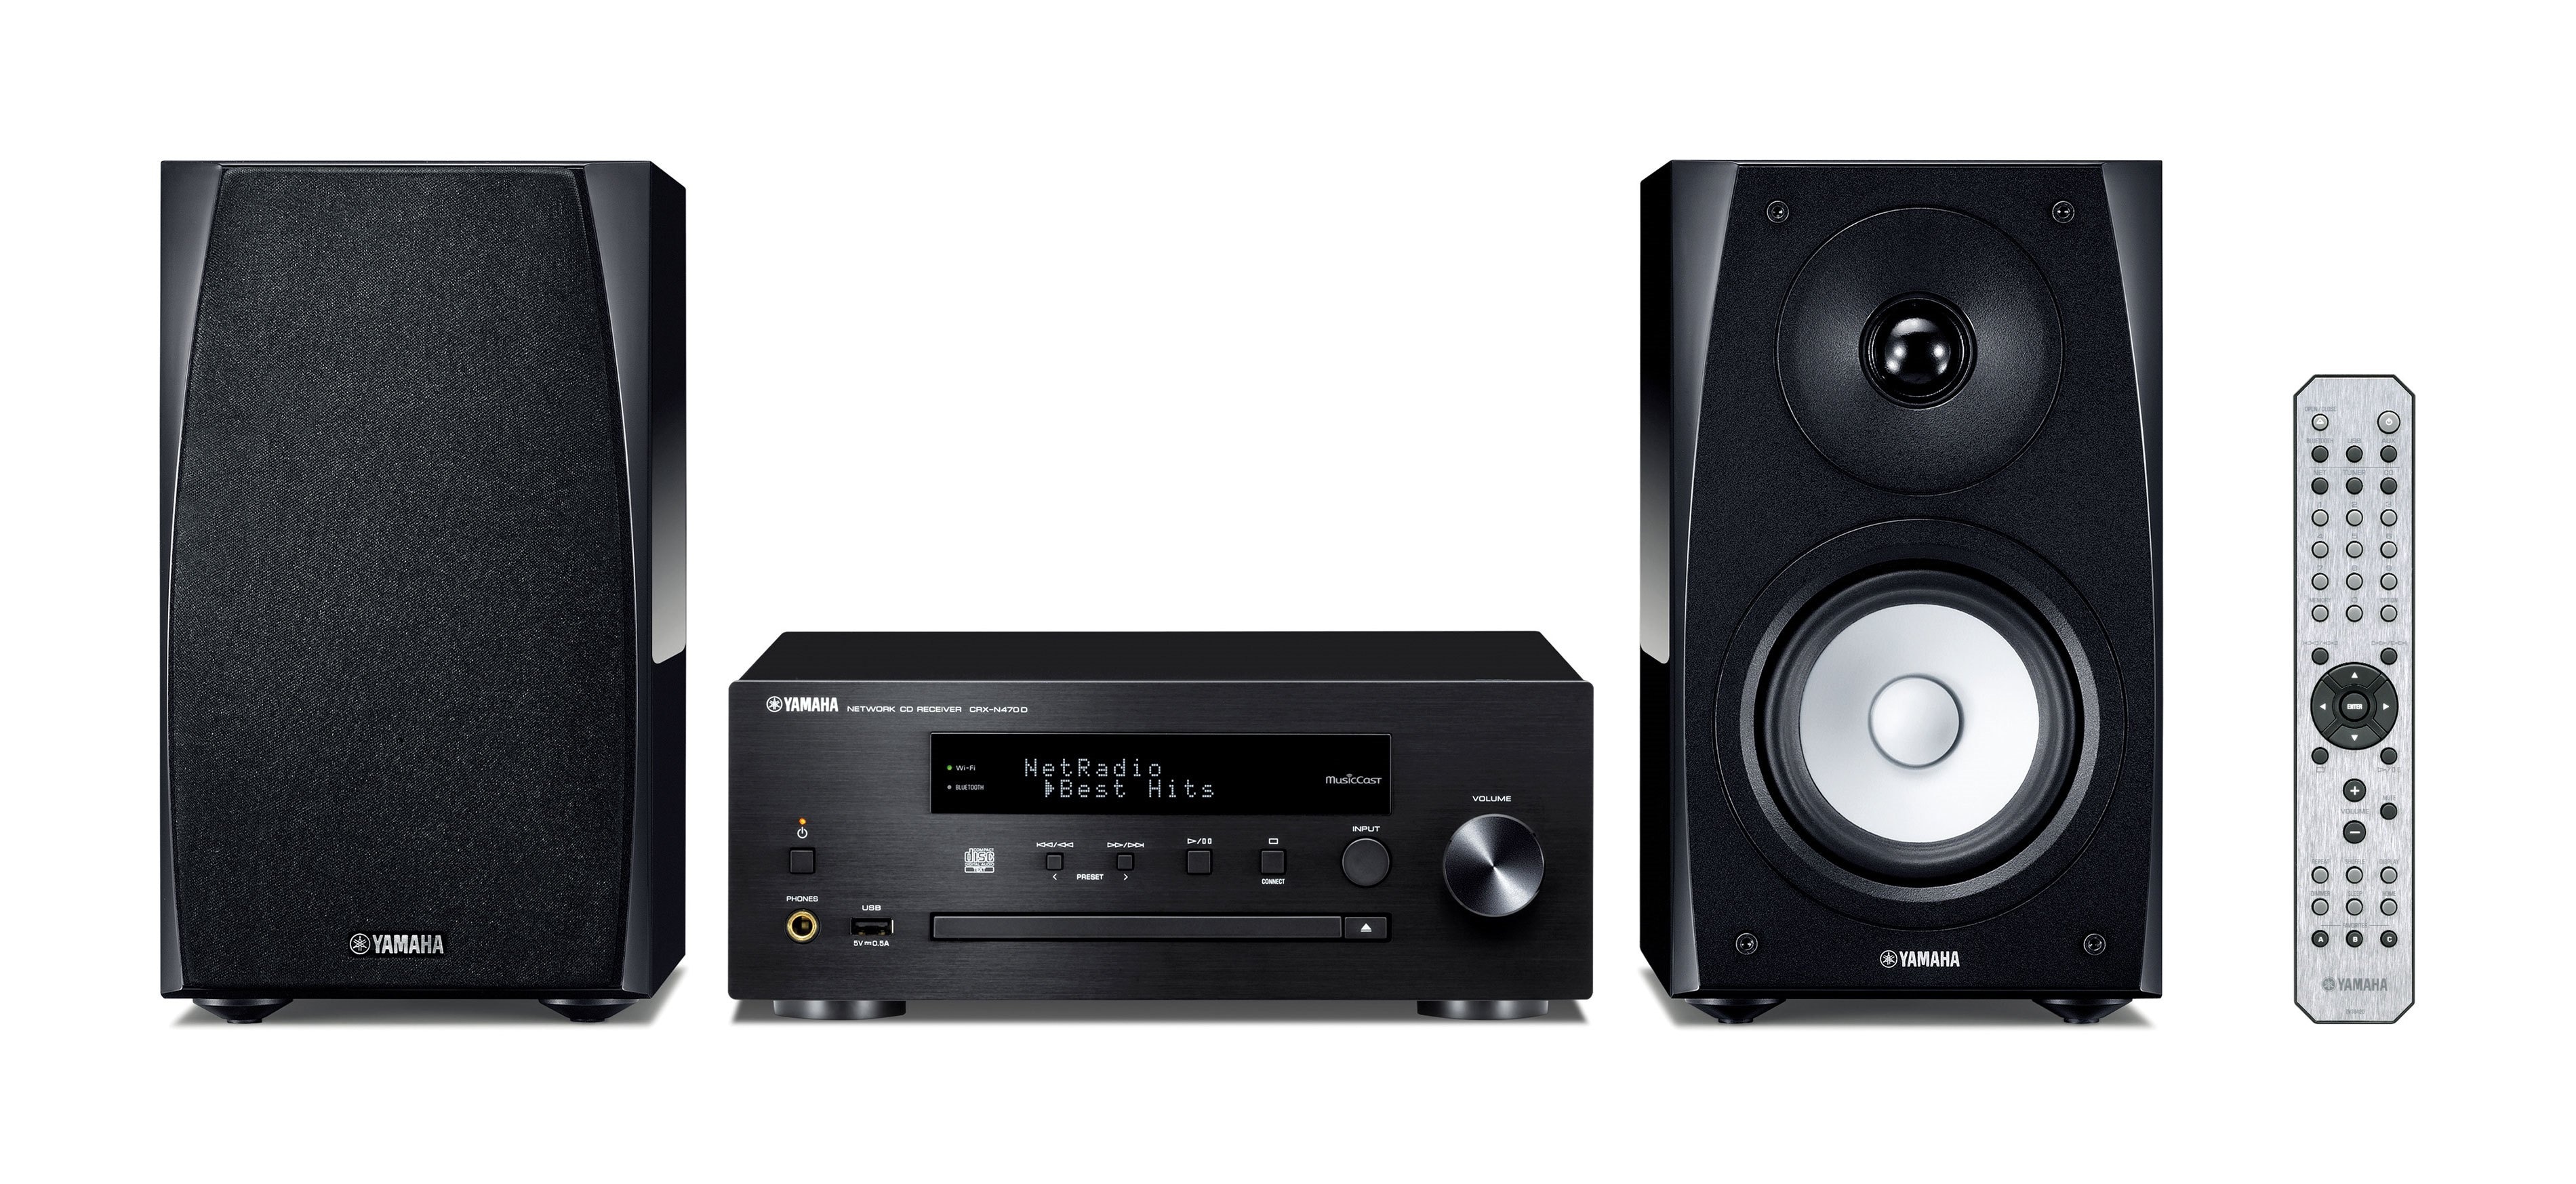 MCR-N570D - - States Yamaha United - Products - Visual & - Mini-Systems Audio - Overview